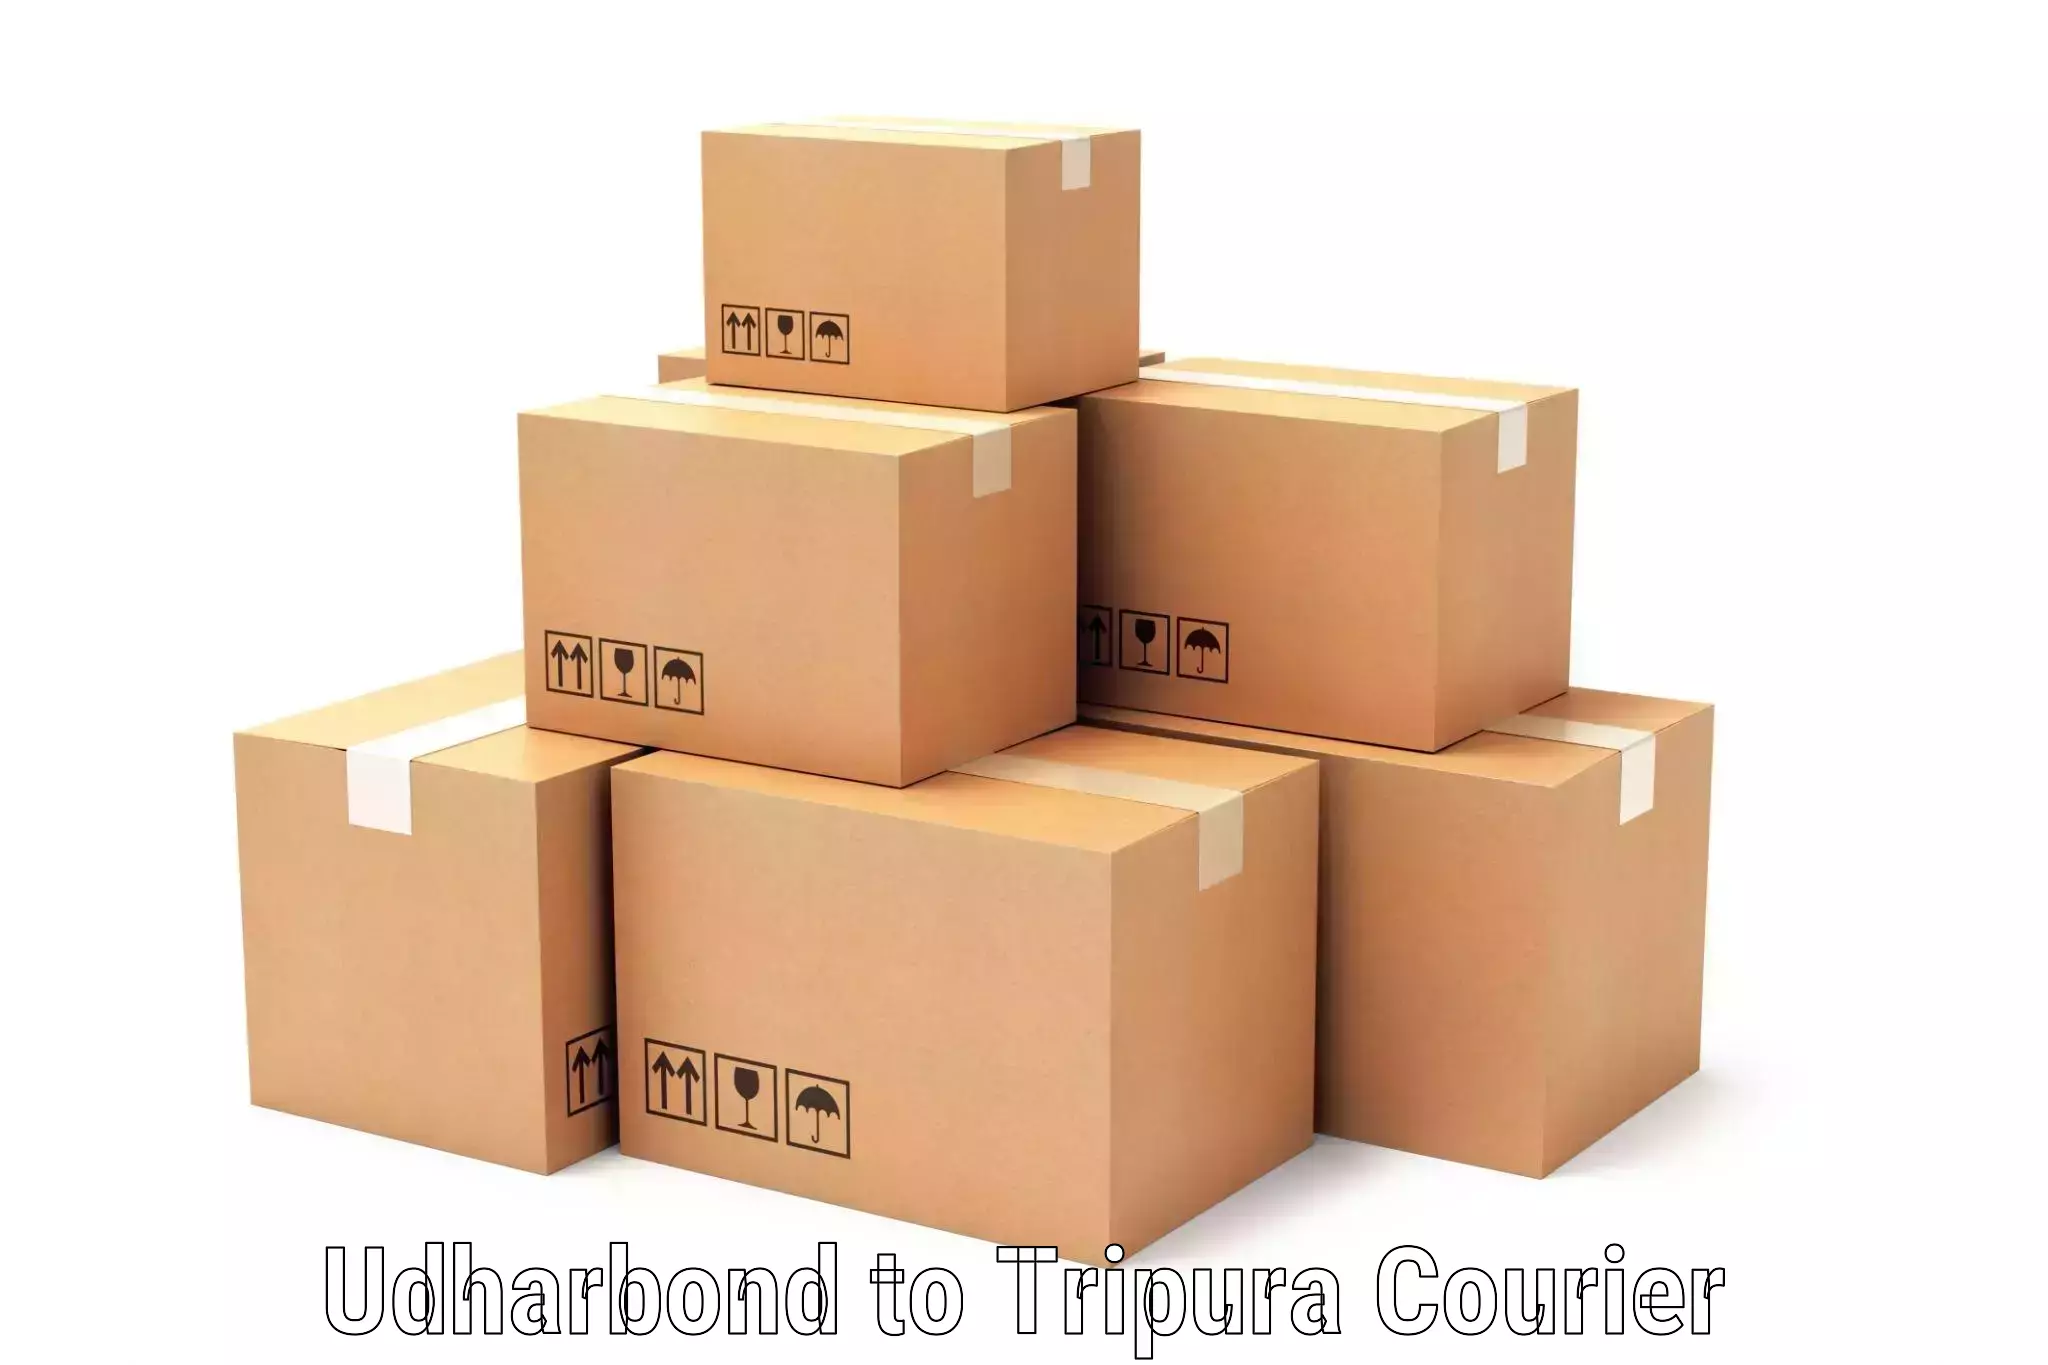 Courier service booking Udharbond to Tripura